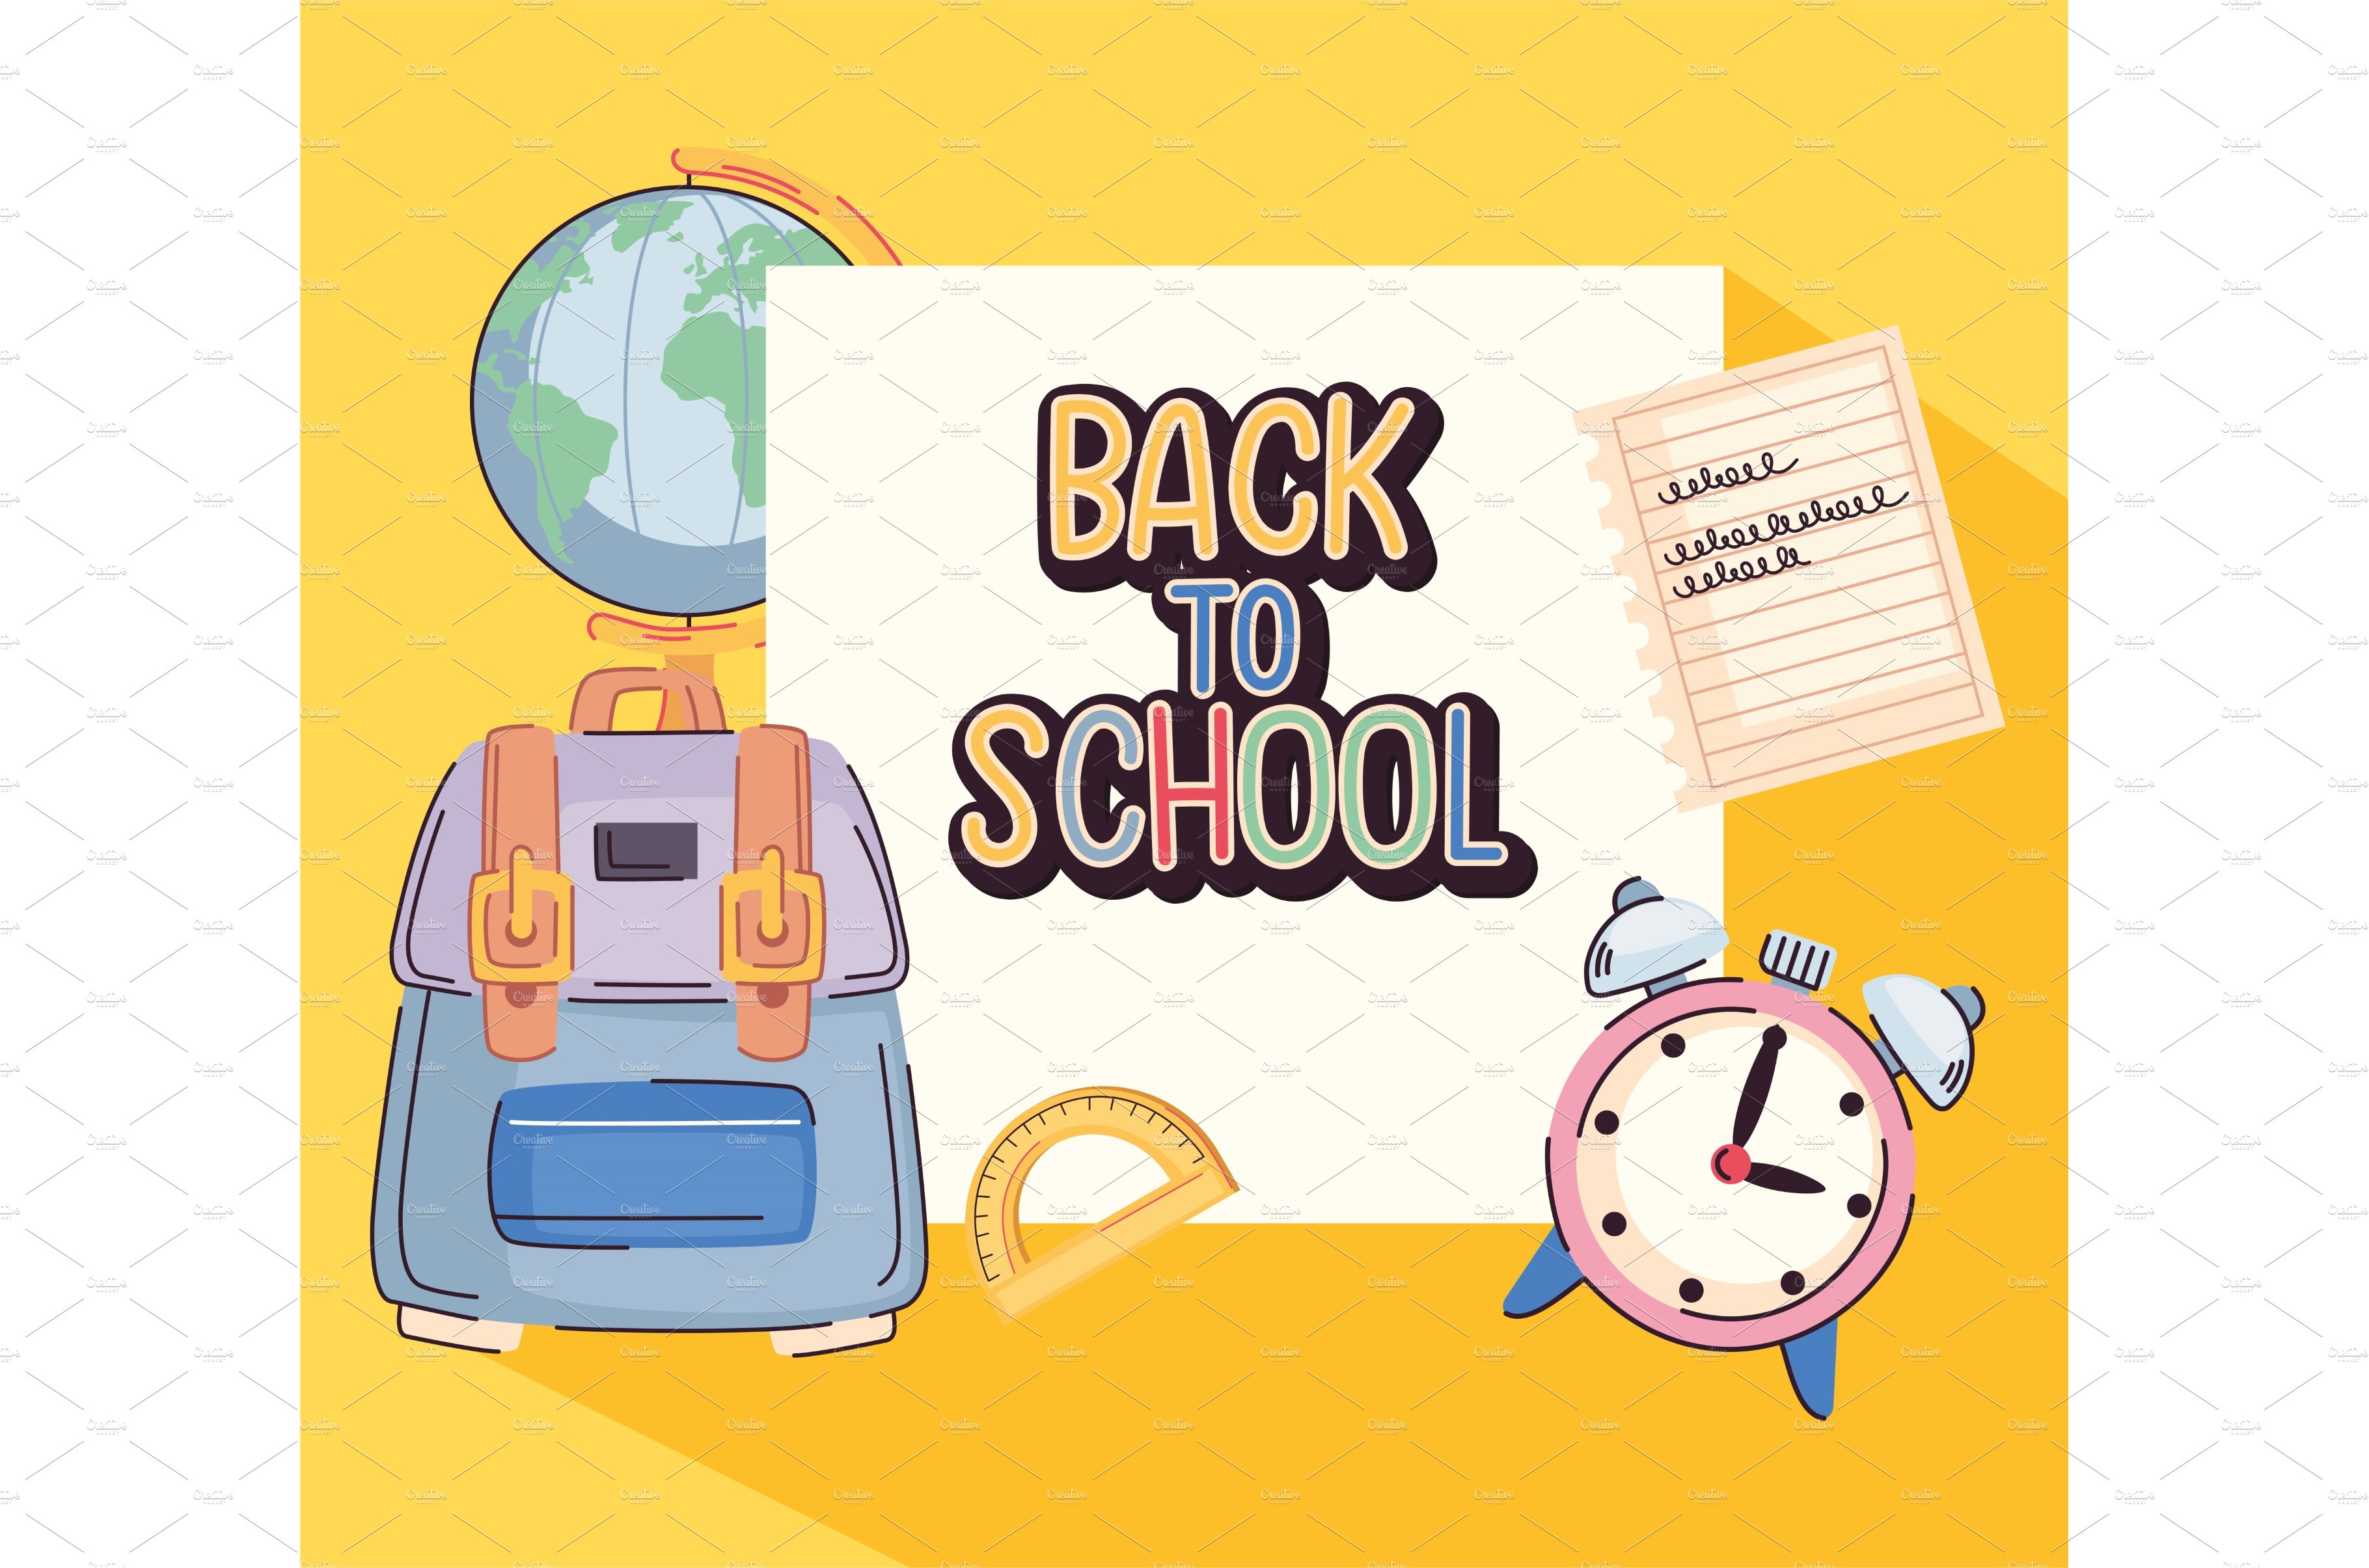 back to school lettering poster cover image.